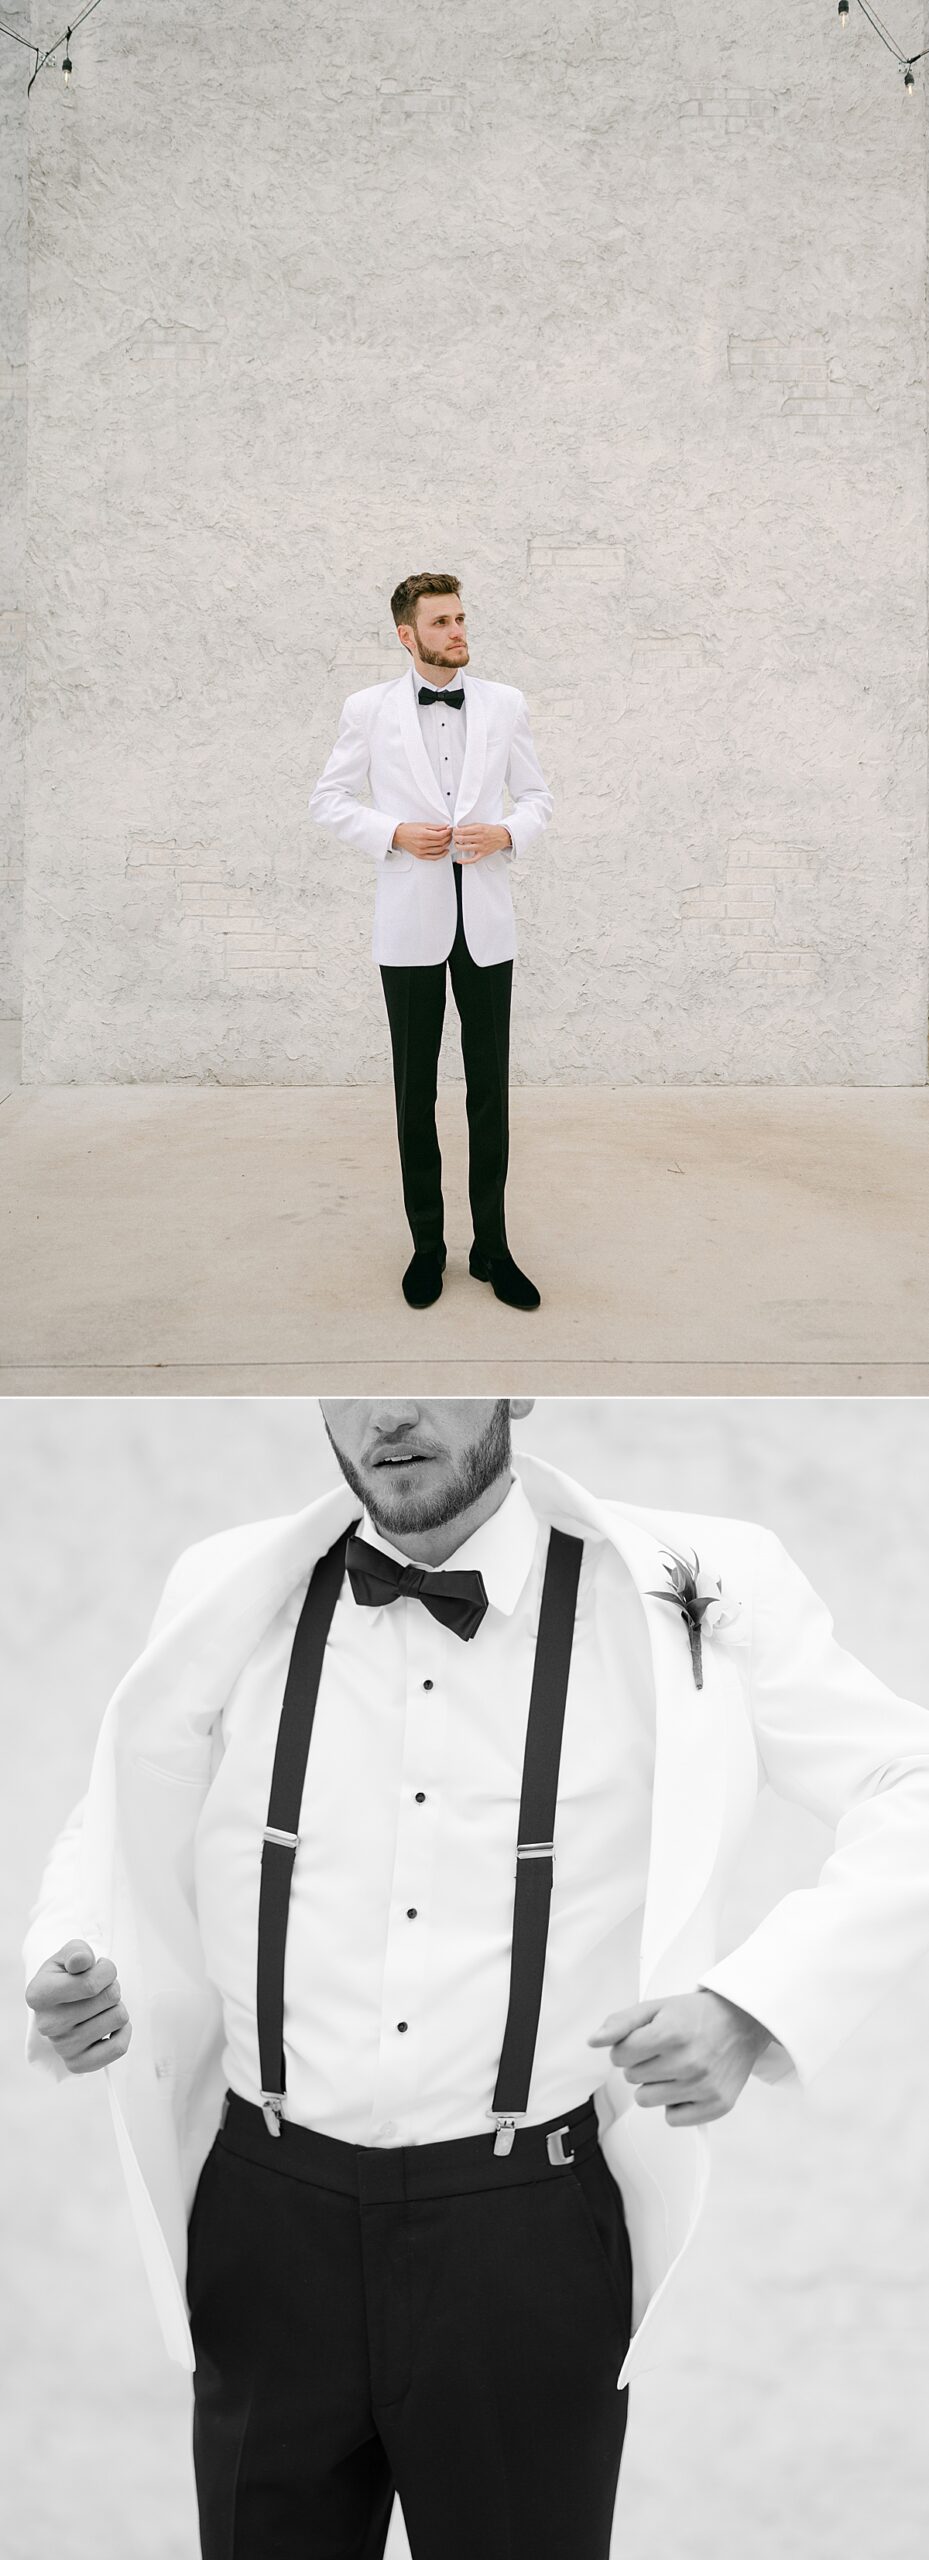 Groom wearing black trousers, and a white jacket with a black bowtie, shoes and shirt buttons.  